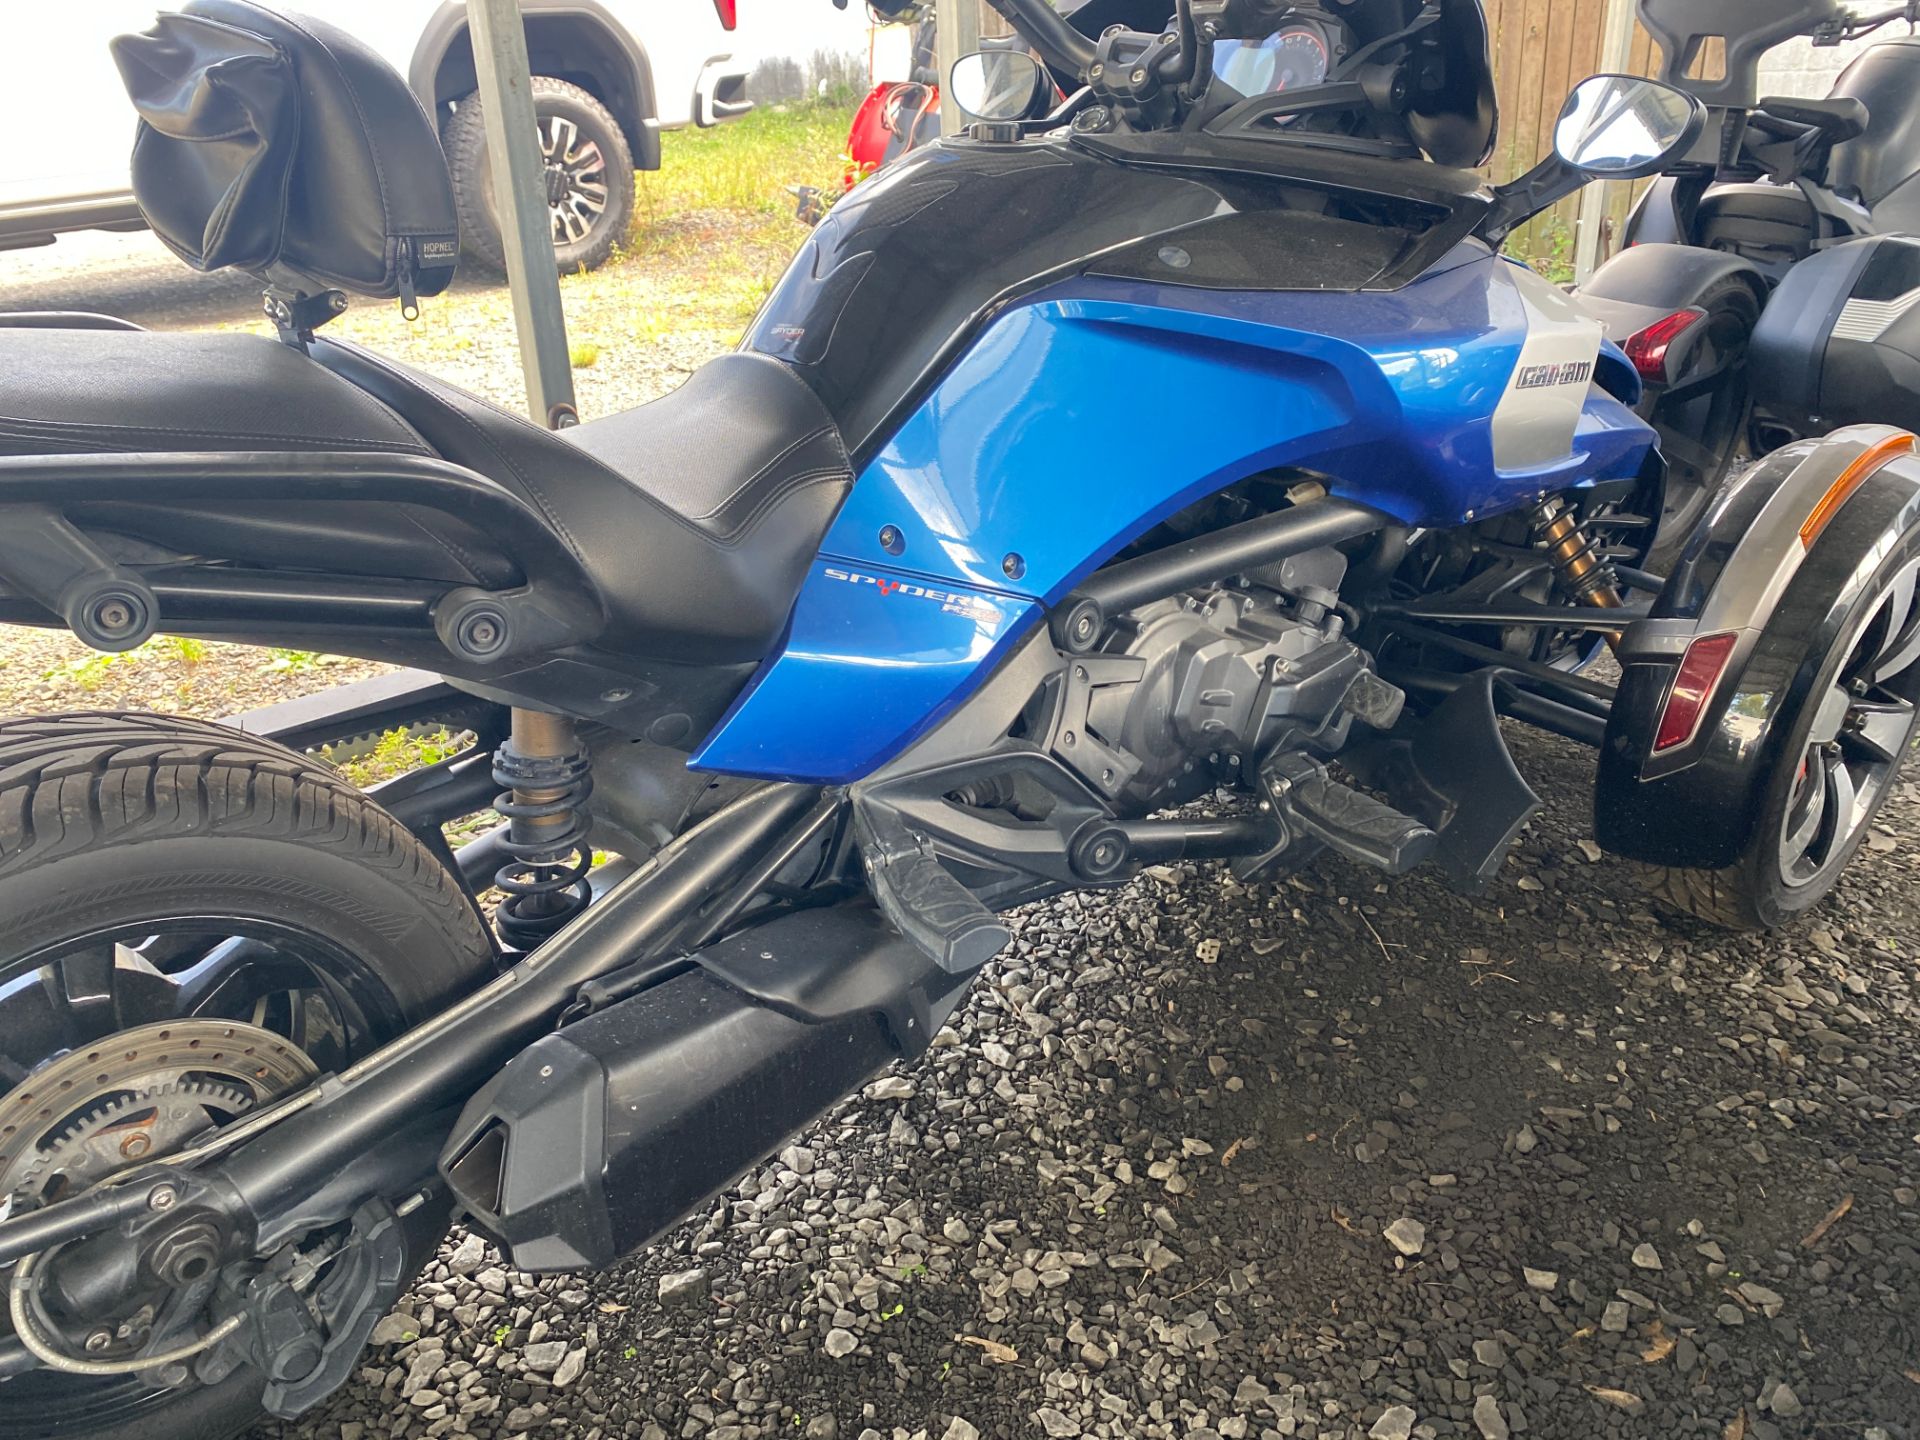 2017 Can-Am Spyder F3-S SE6 in New Britain, Pennsylvania - Photo 3